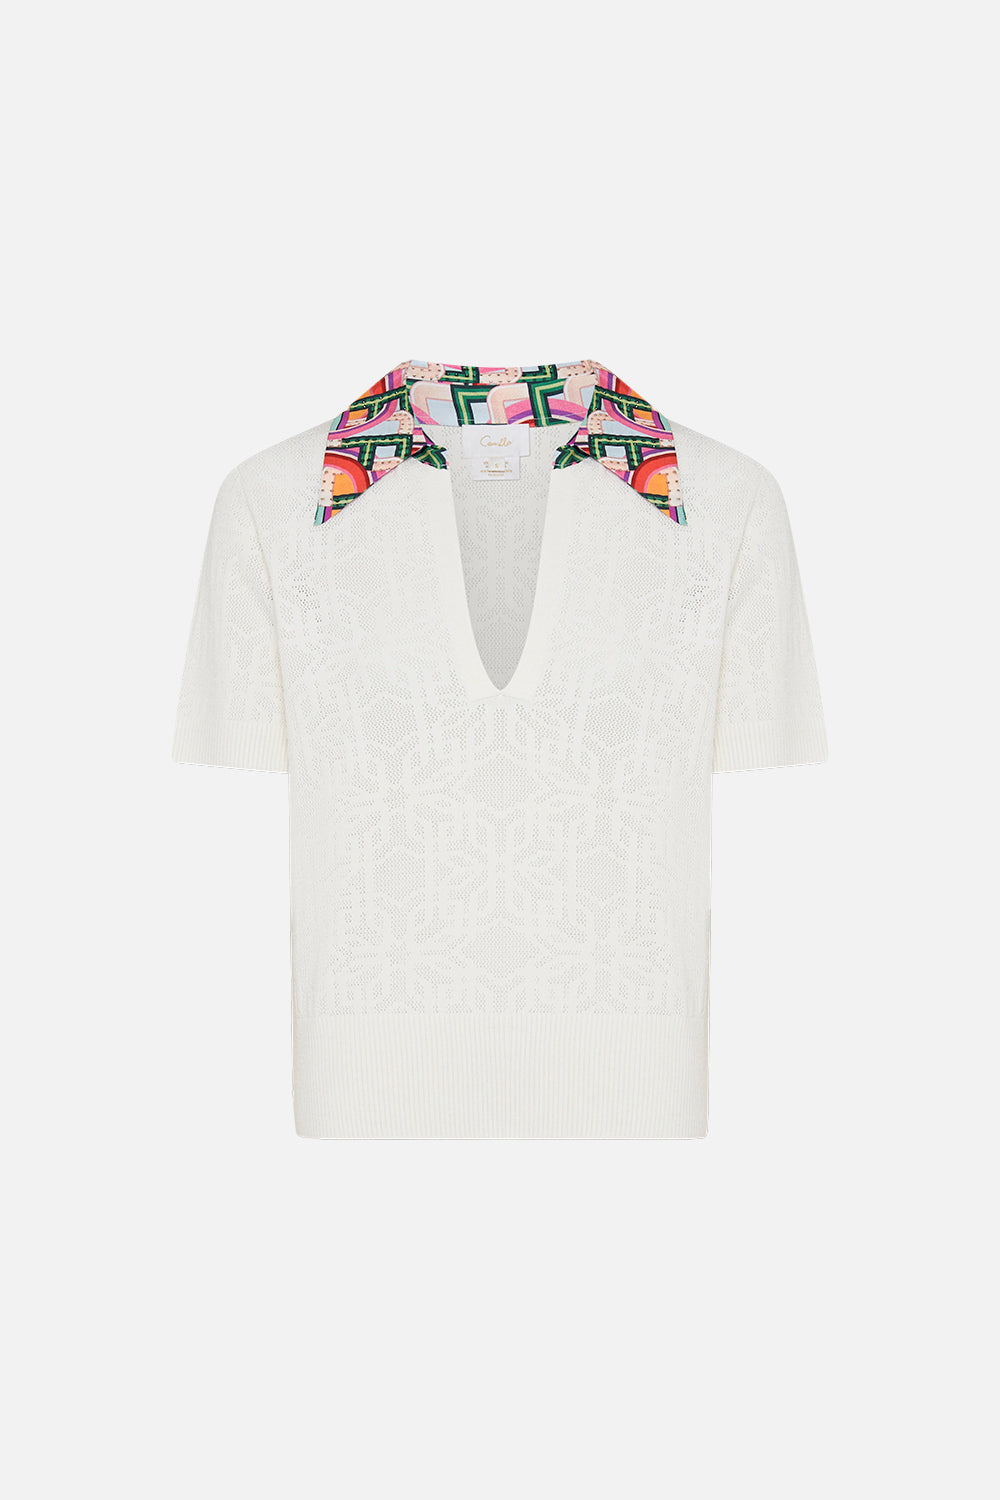 Product view of CAMILLA white knit polo  top in An Italian Welcome print